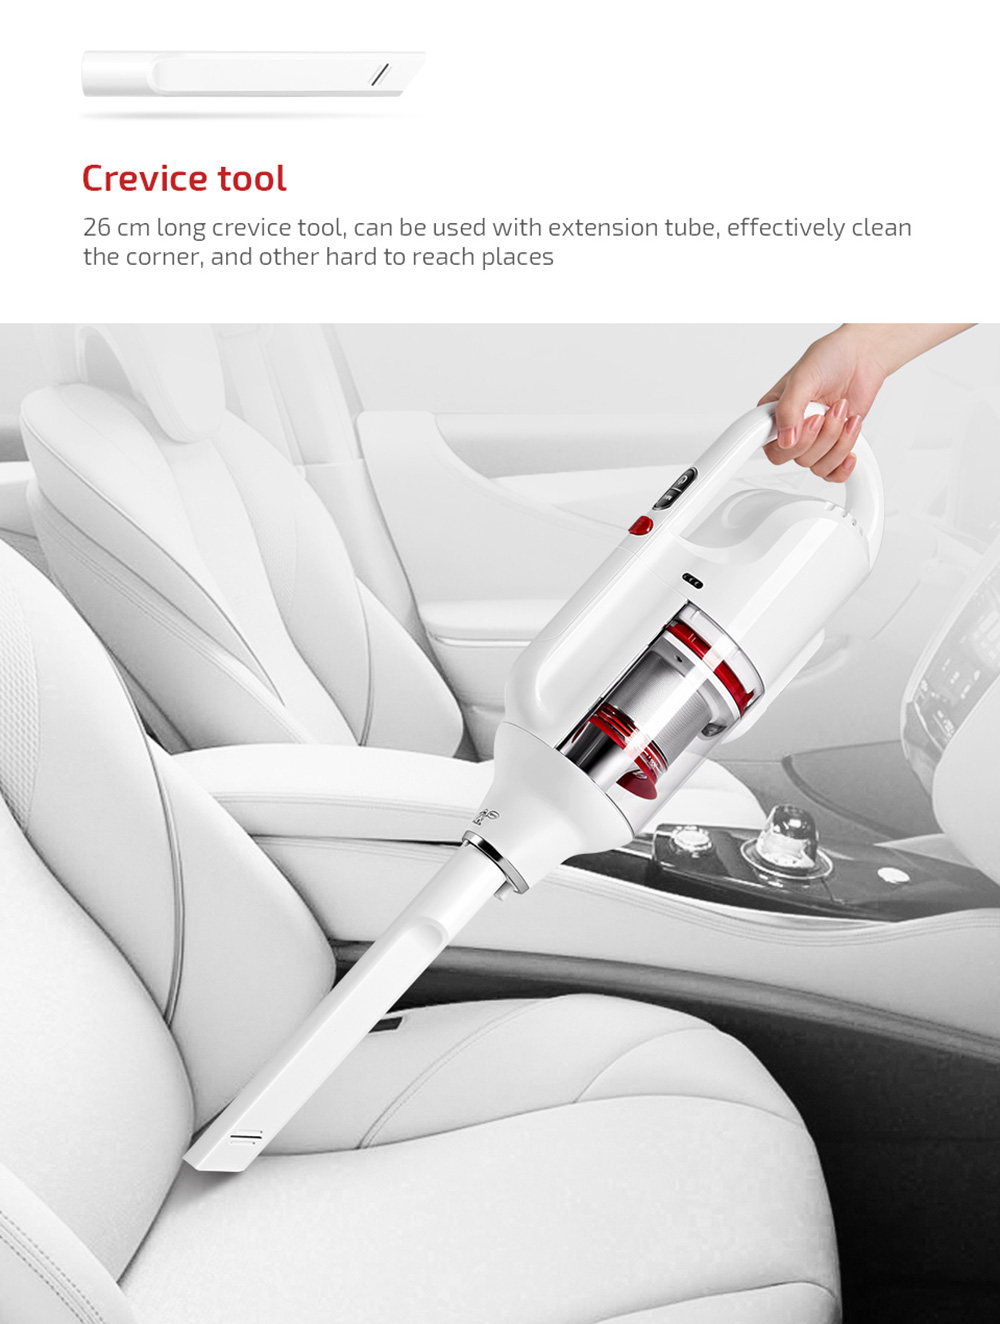 PUPPYOO T10 Home Cordless Stick Vacuum Cleaner 17.5Kpa Powerful Suction 45 Minutes Runtime - White